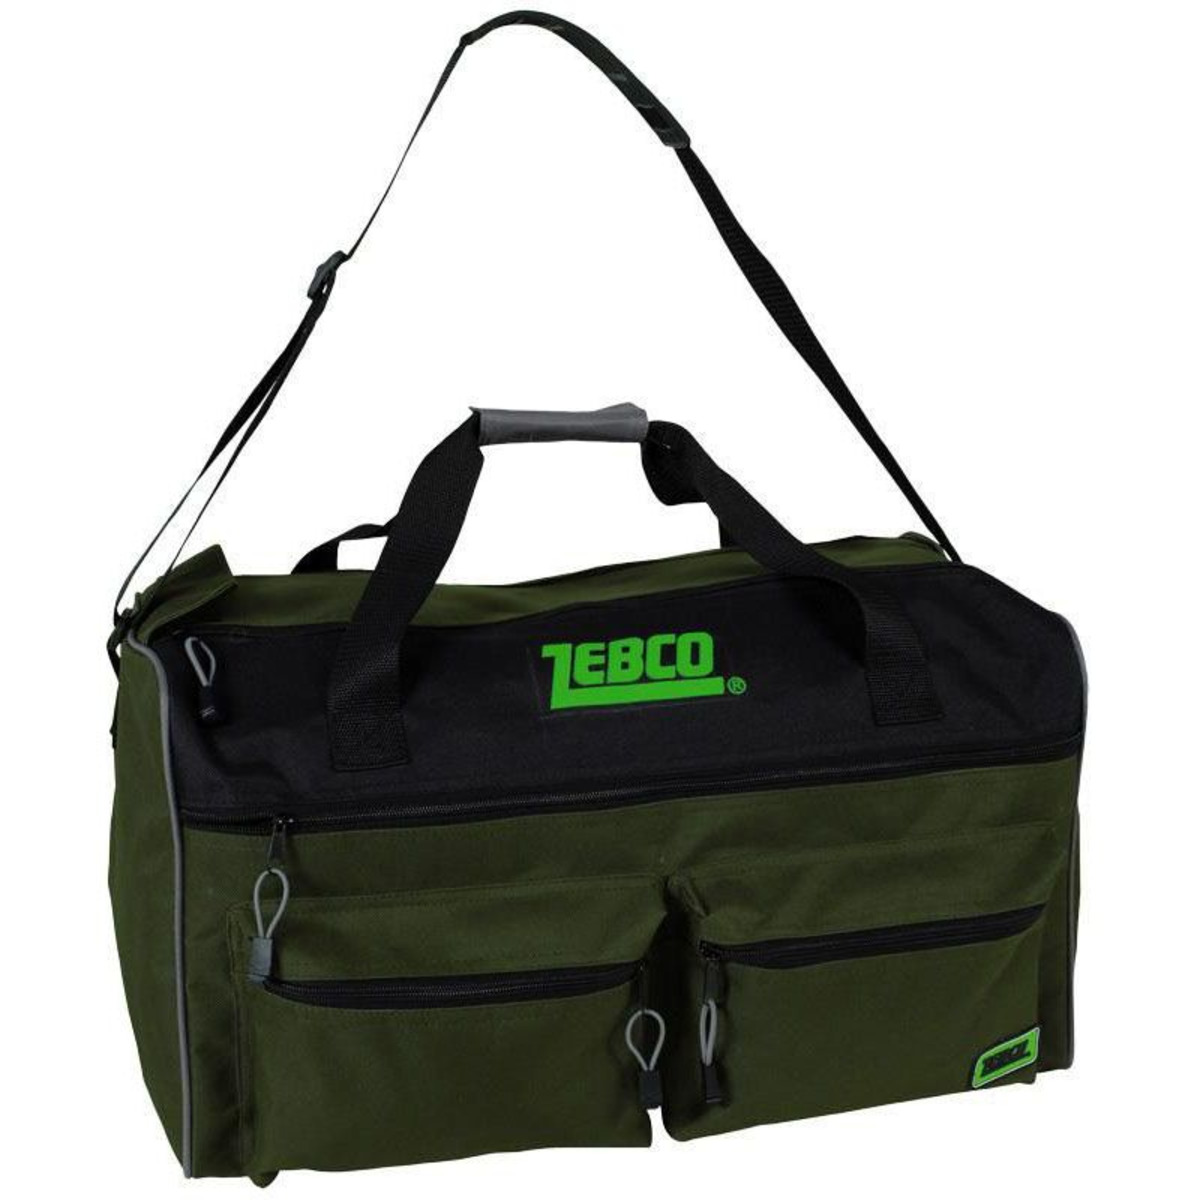 Zebco All Round Carryall - 49x28x28 cm